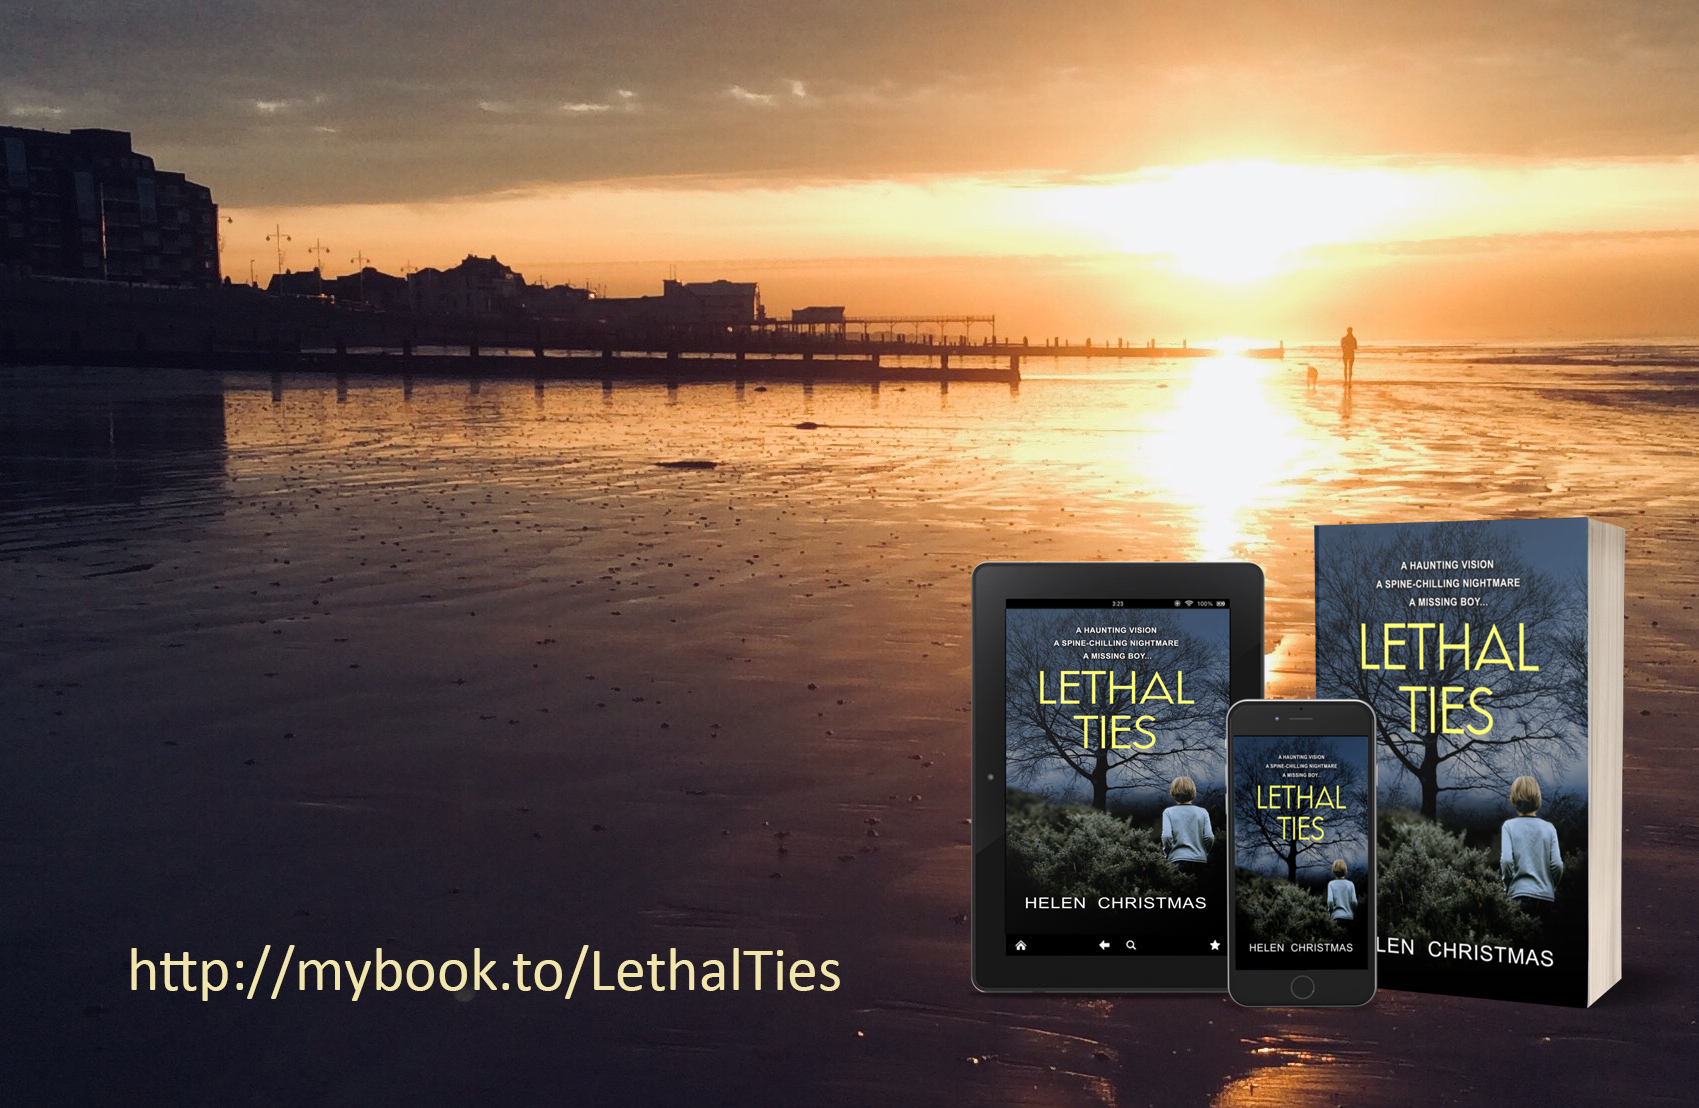 Lethal Ties Psychological thriller by Helen Christmas 99p/99c on Amazon for Mental Health Awareness Week 2023.